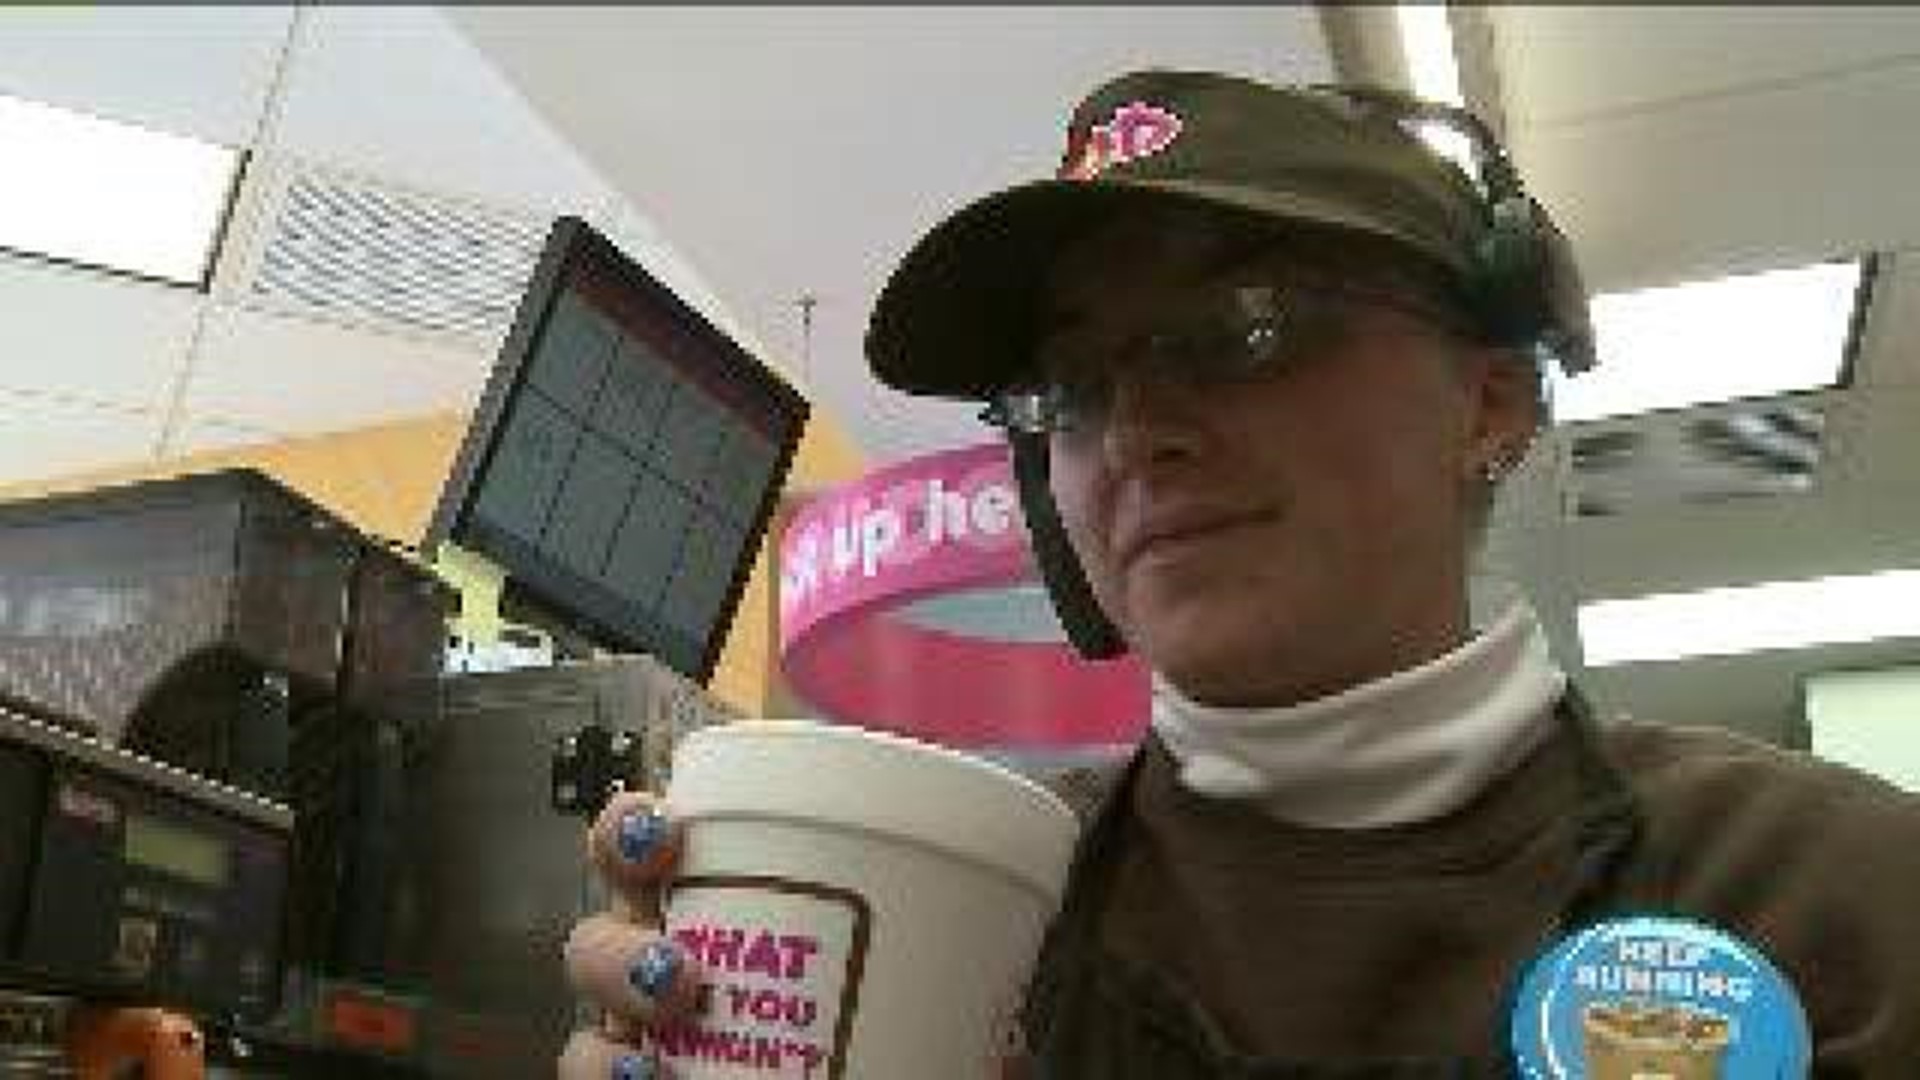 Wham Cam: Does Blowing on Hot Food Help Cool it Down?